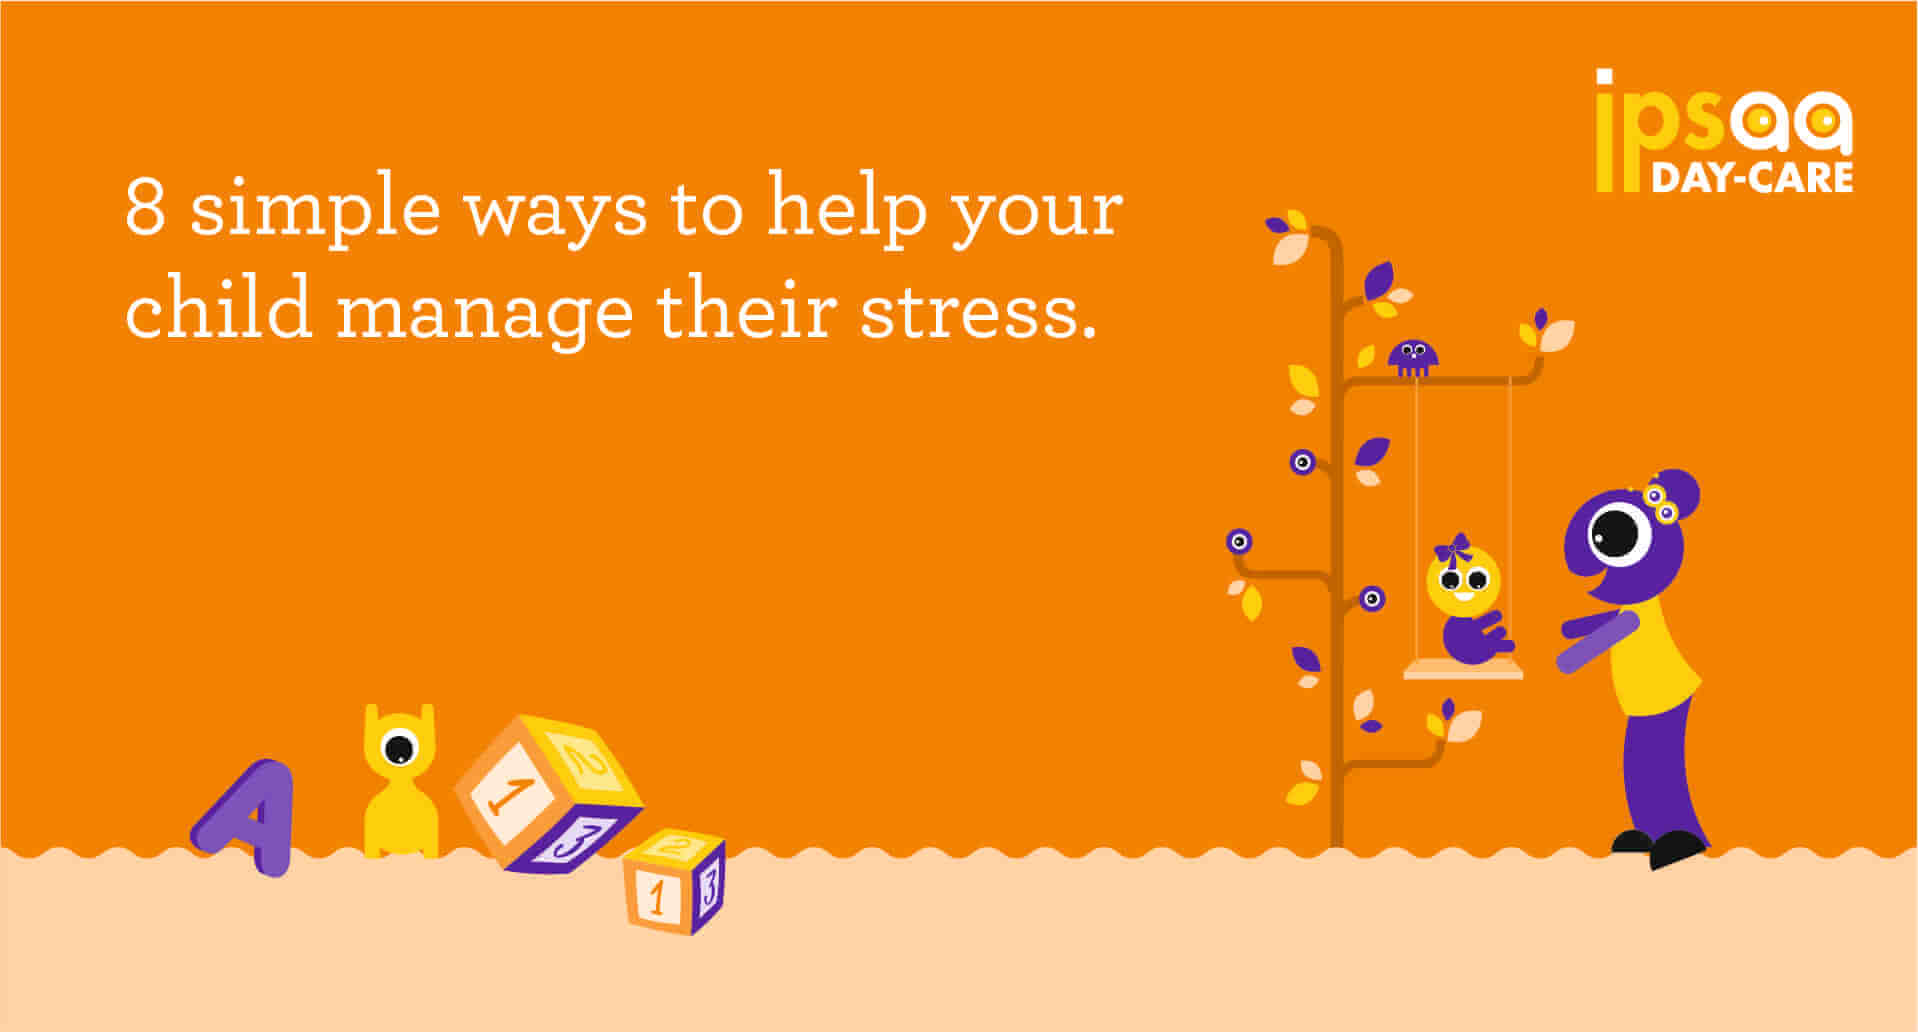 How to help your child manage their stress?